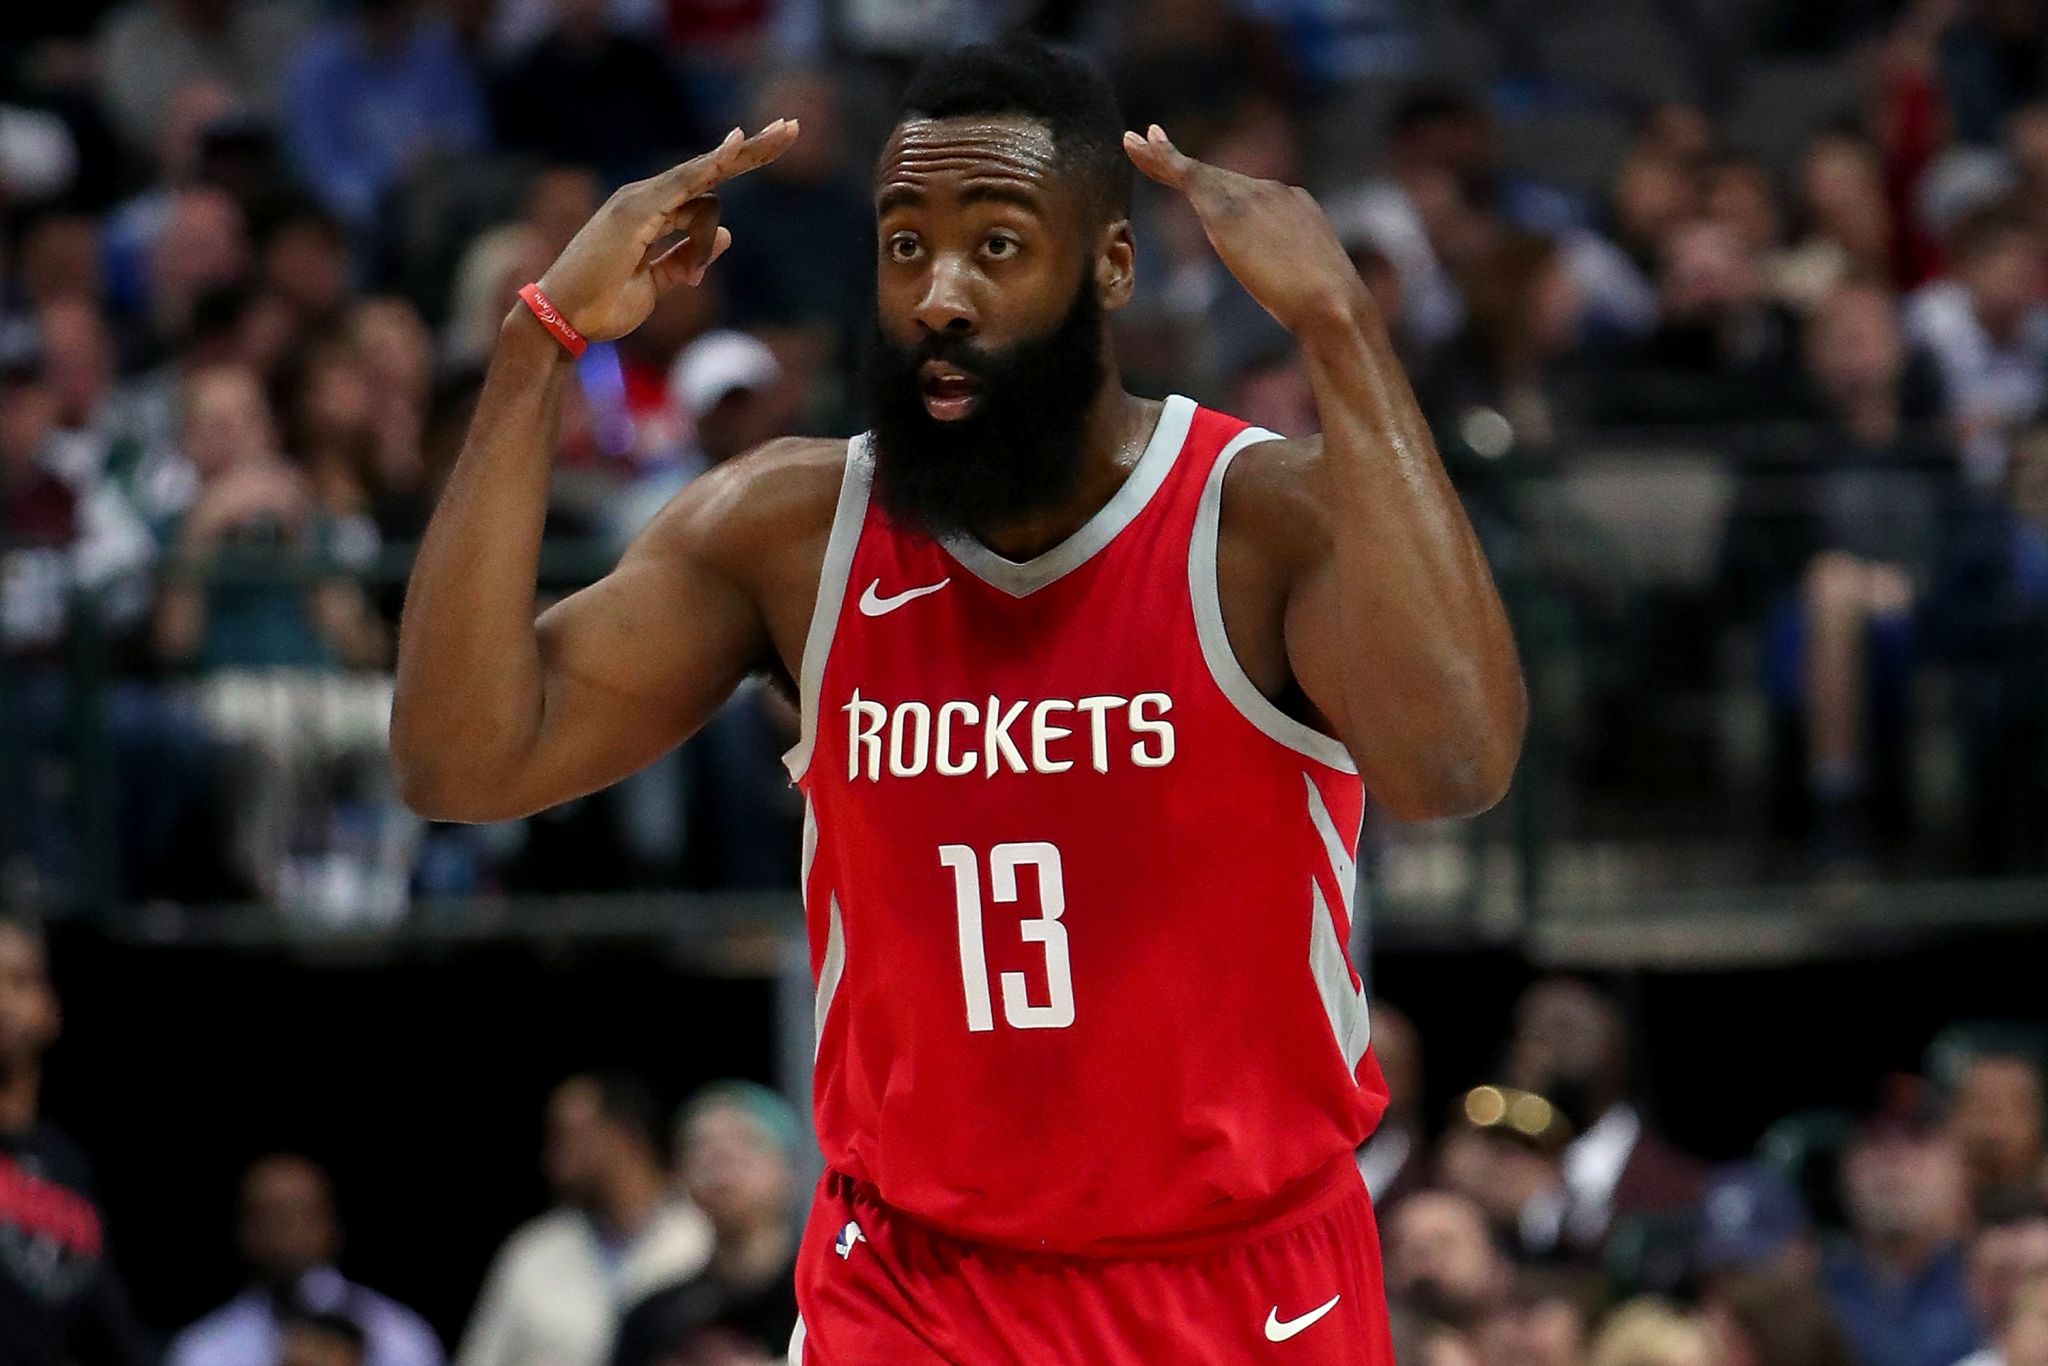 Houston Rockets' Harden scores GQ cover, talks his 'maximalist' style and  his beard - CultureMap Houston